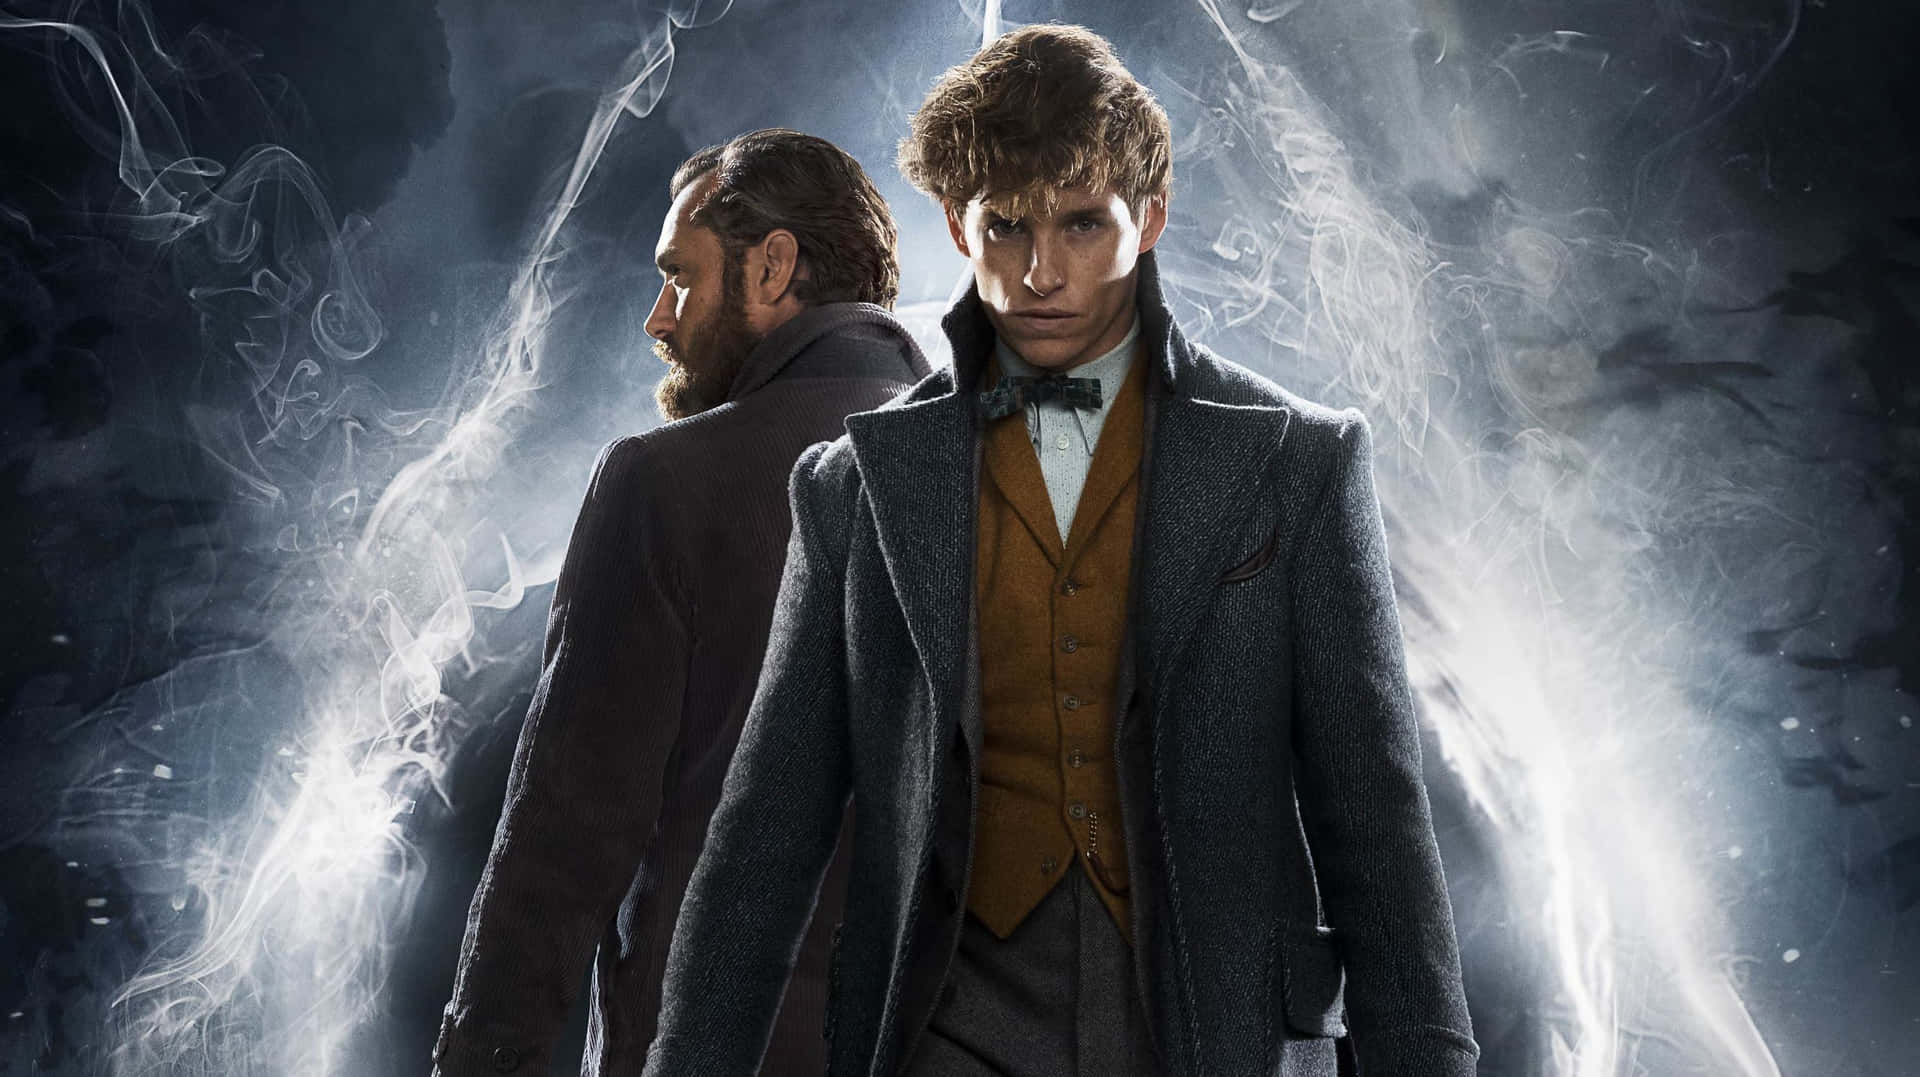 Fantastic Beasts Wallpaper featuring Newt Scamander with magical creatures Wallpaper